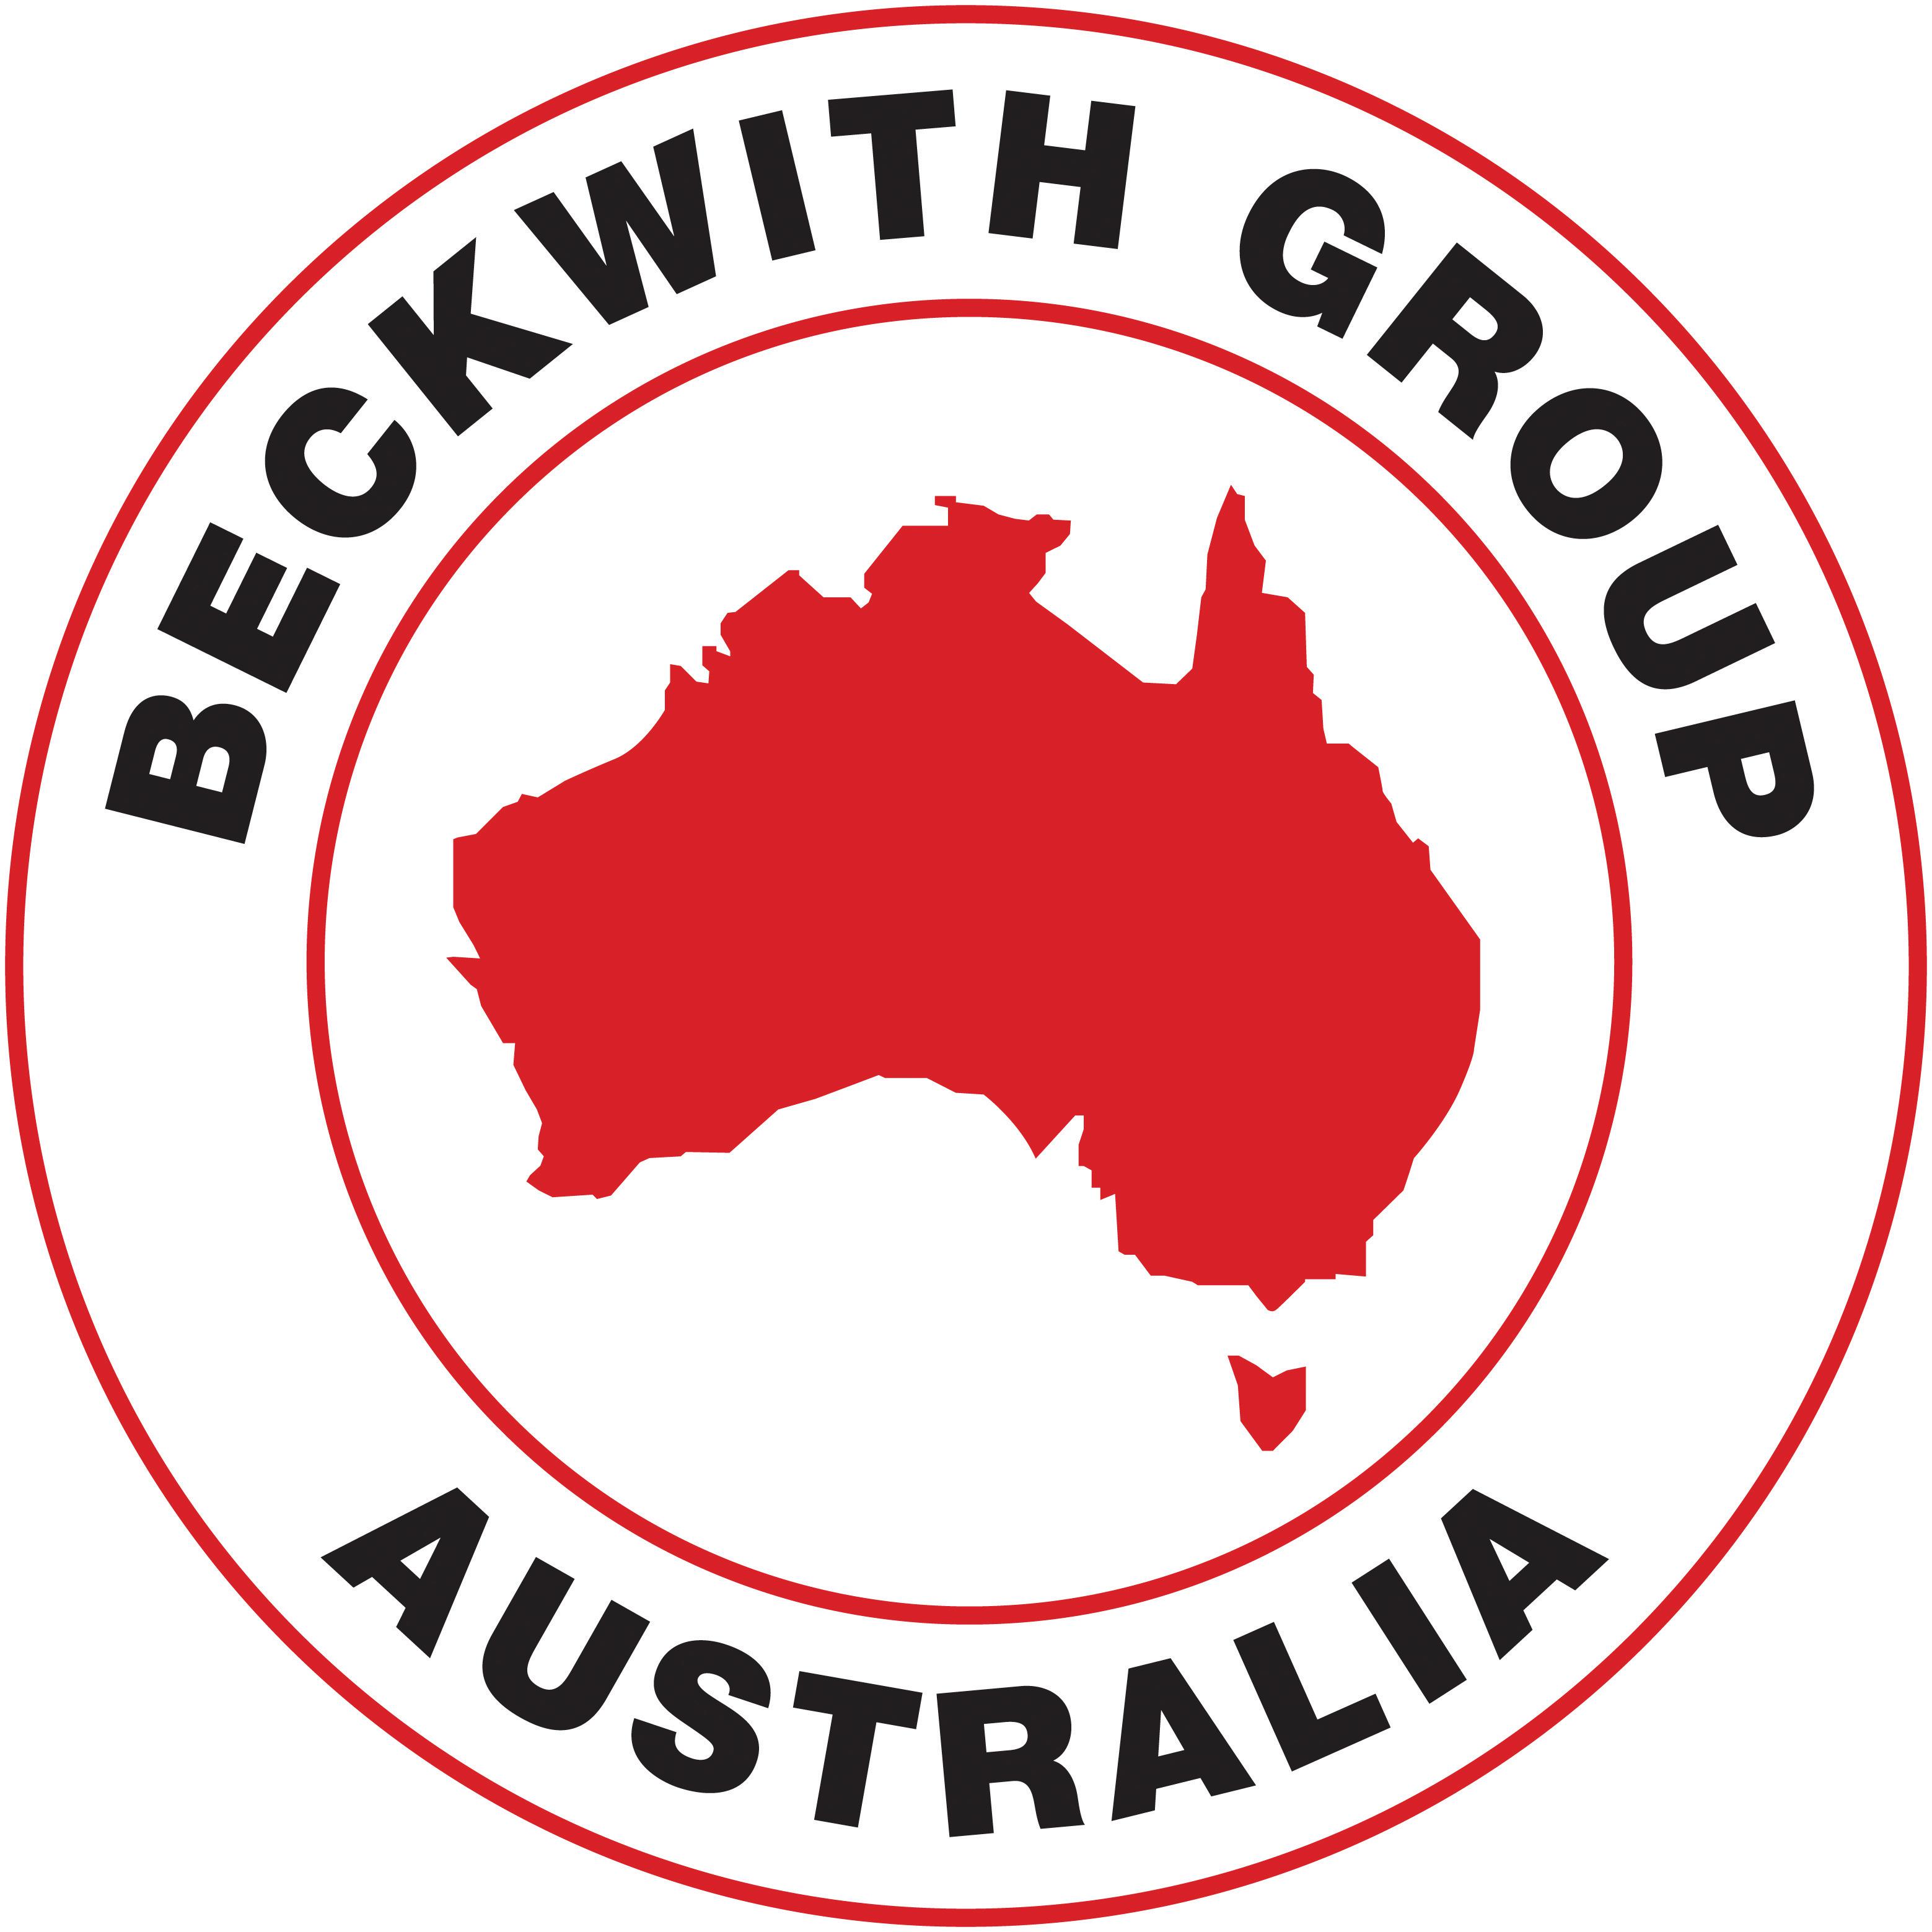 Beckwith Group Coburg North (03) 9354 3833